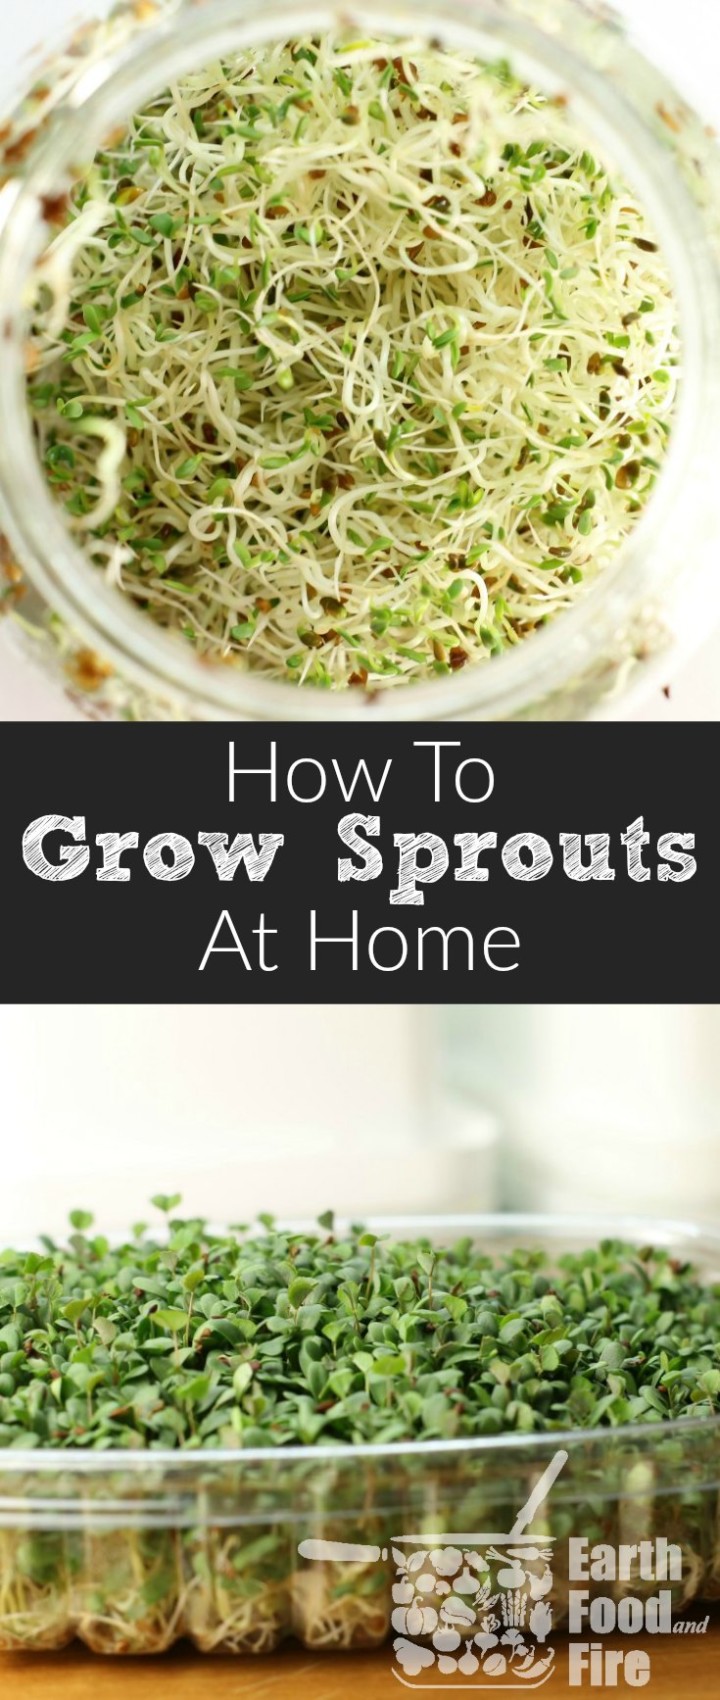 Learn how to grow sproutss at home. An easy and a great kid-friendly activity. Perfect for adding easy, cheap, and tasty nutrition to your diet!